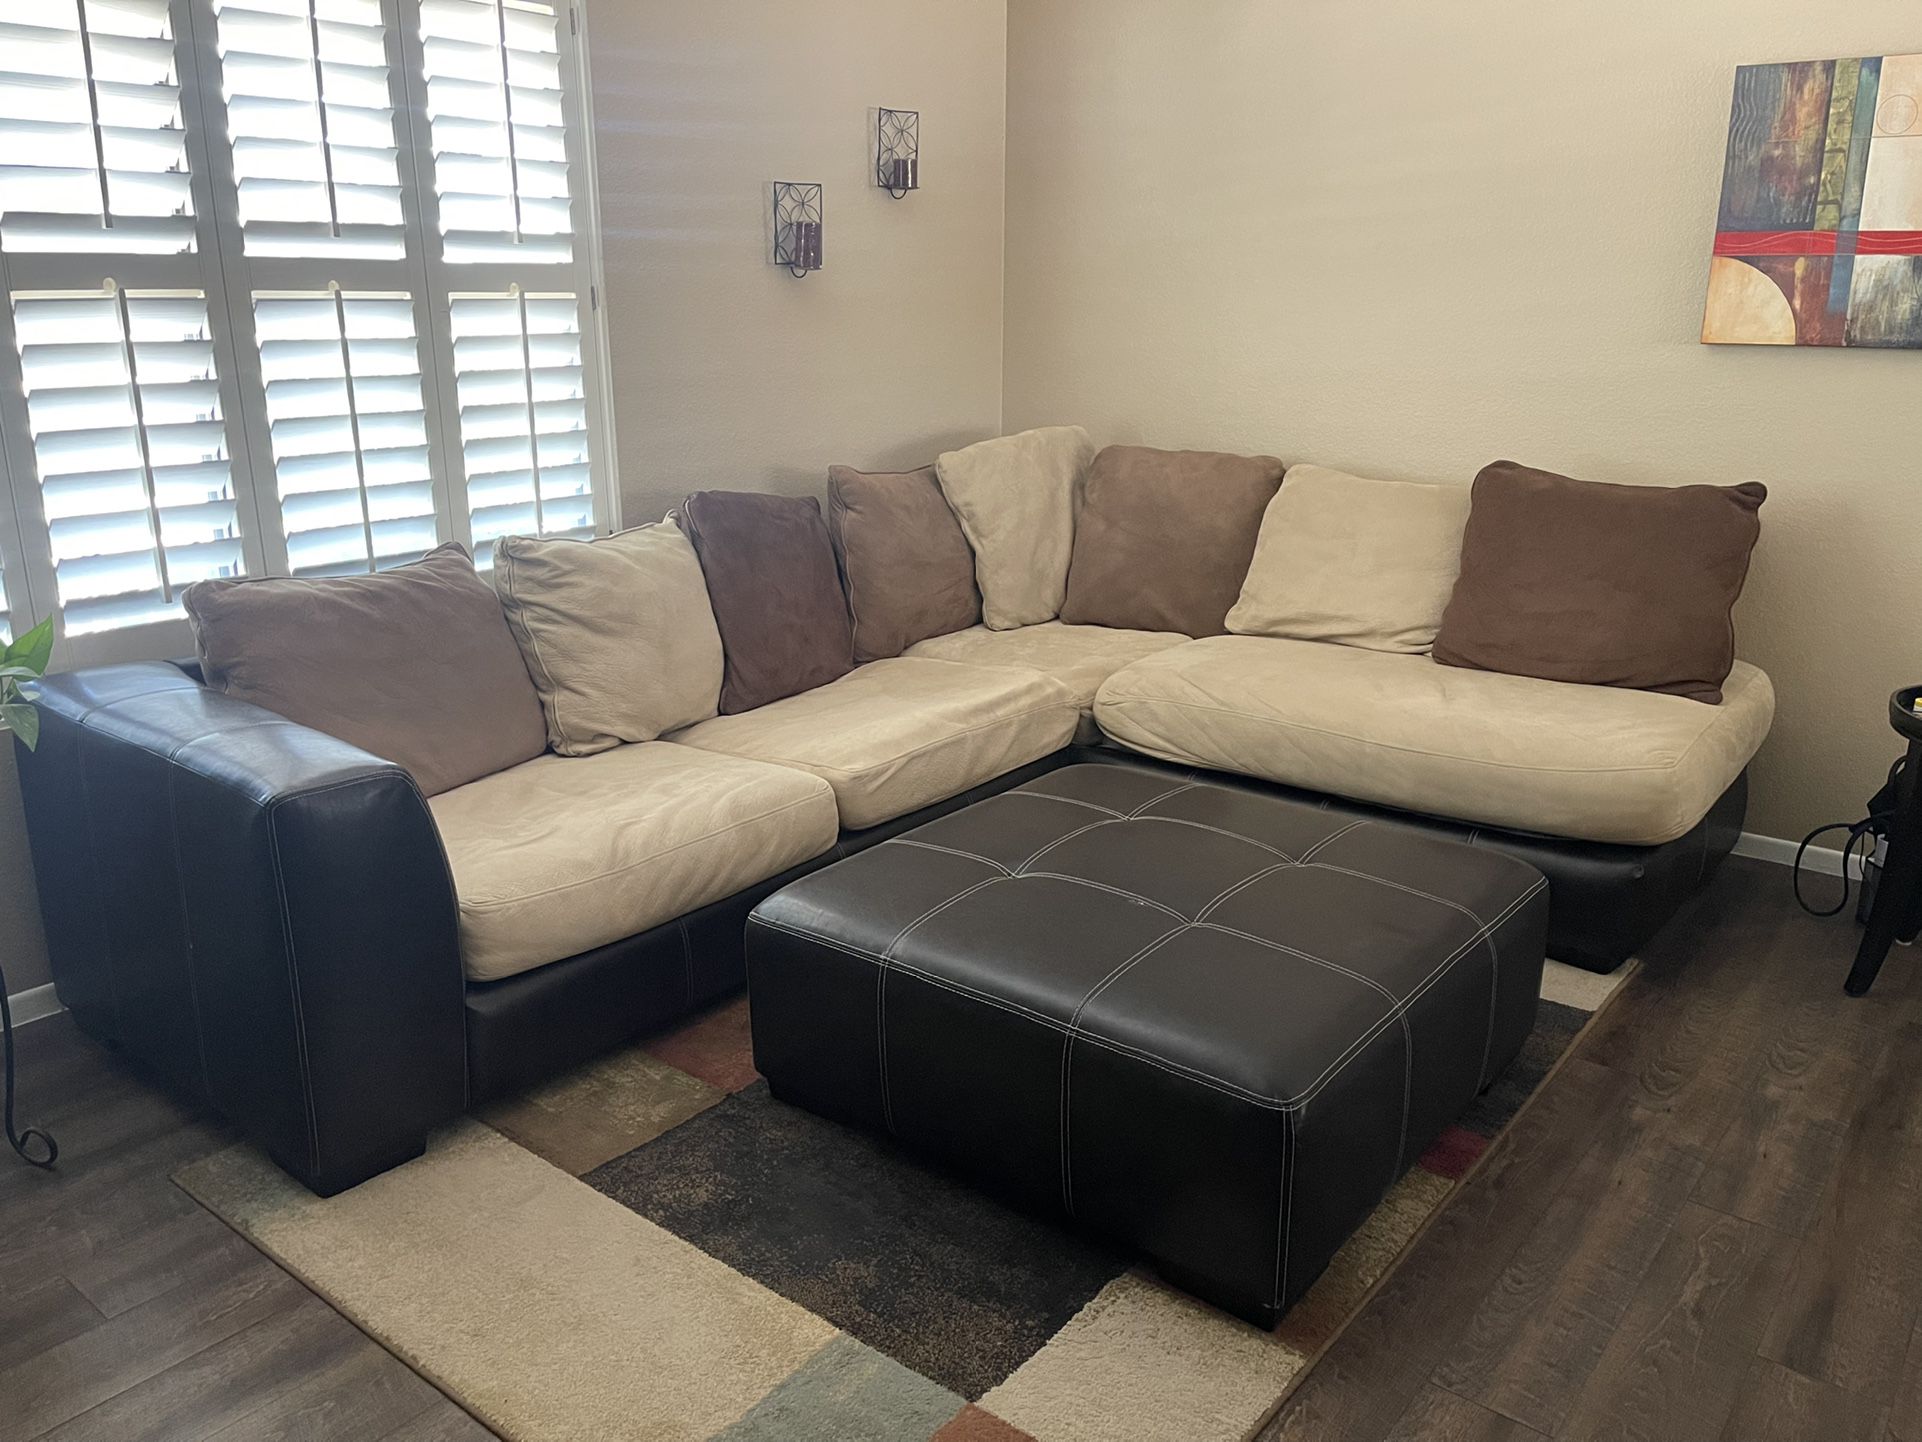 MUST SELL BY 7/16 Make Us An Offer! Sectional Couch With Ottoman AND Oversized Swivel Chair